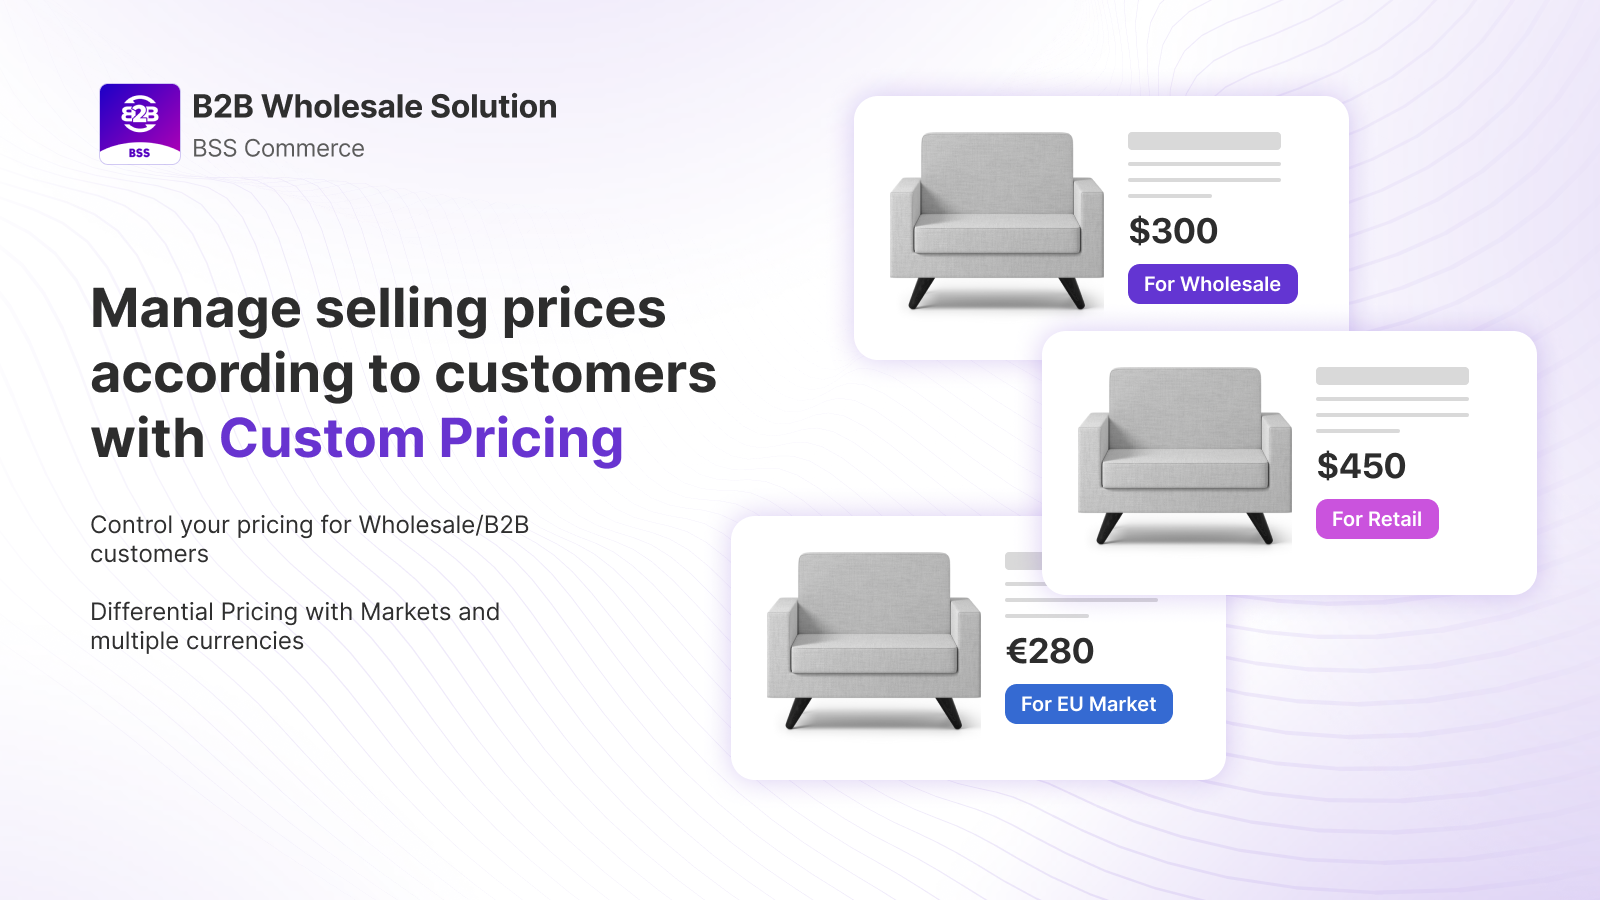 Custom Pricing For Wholesale Customers - Multiple currencies